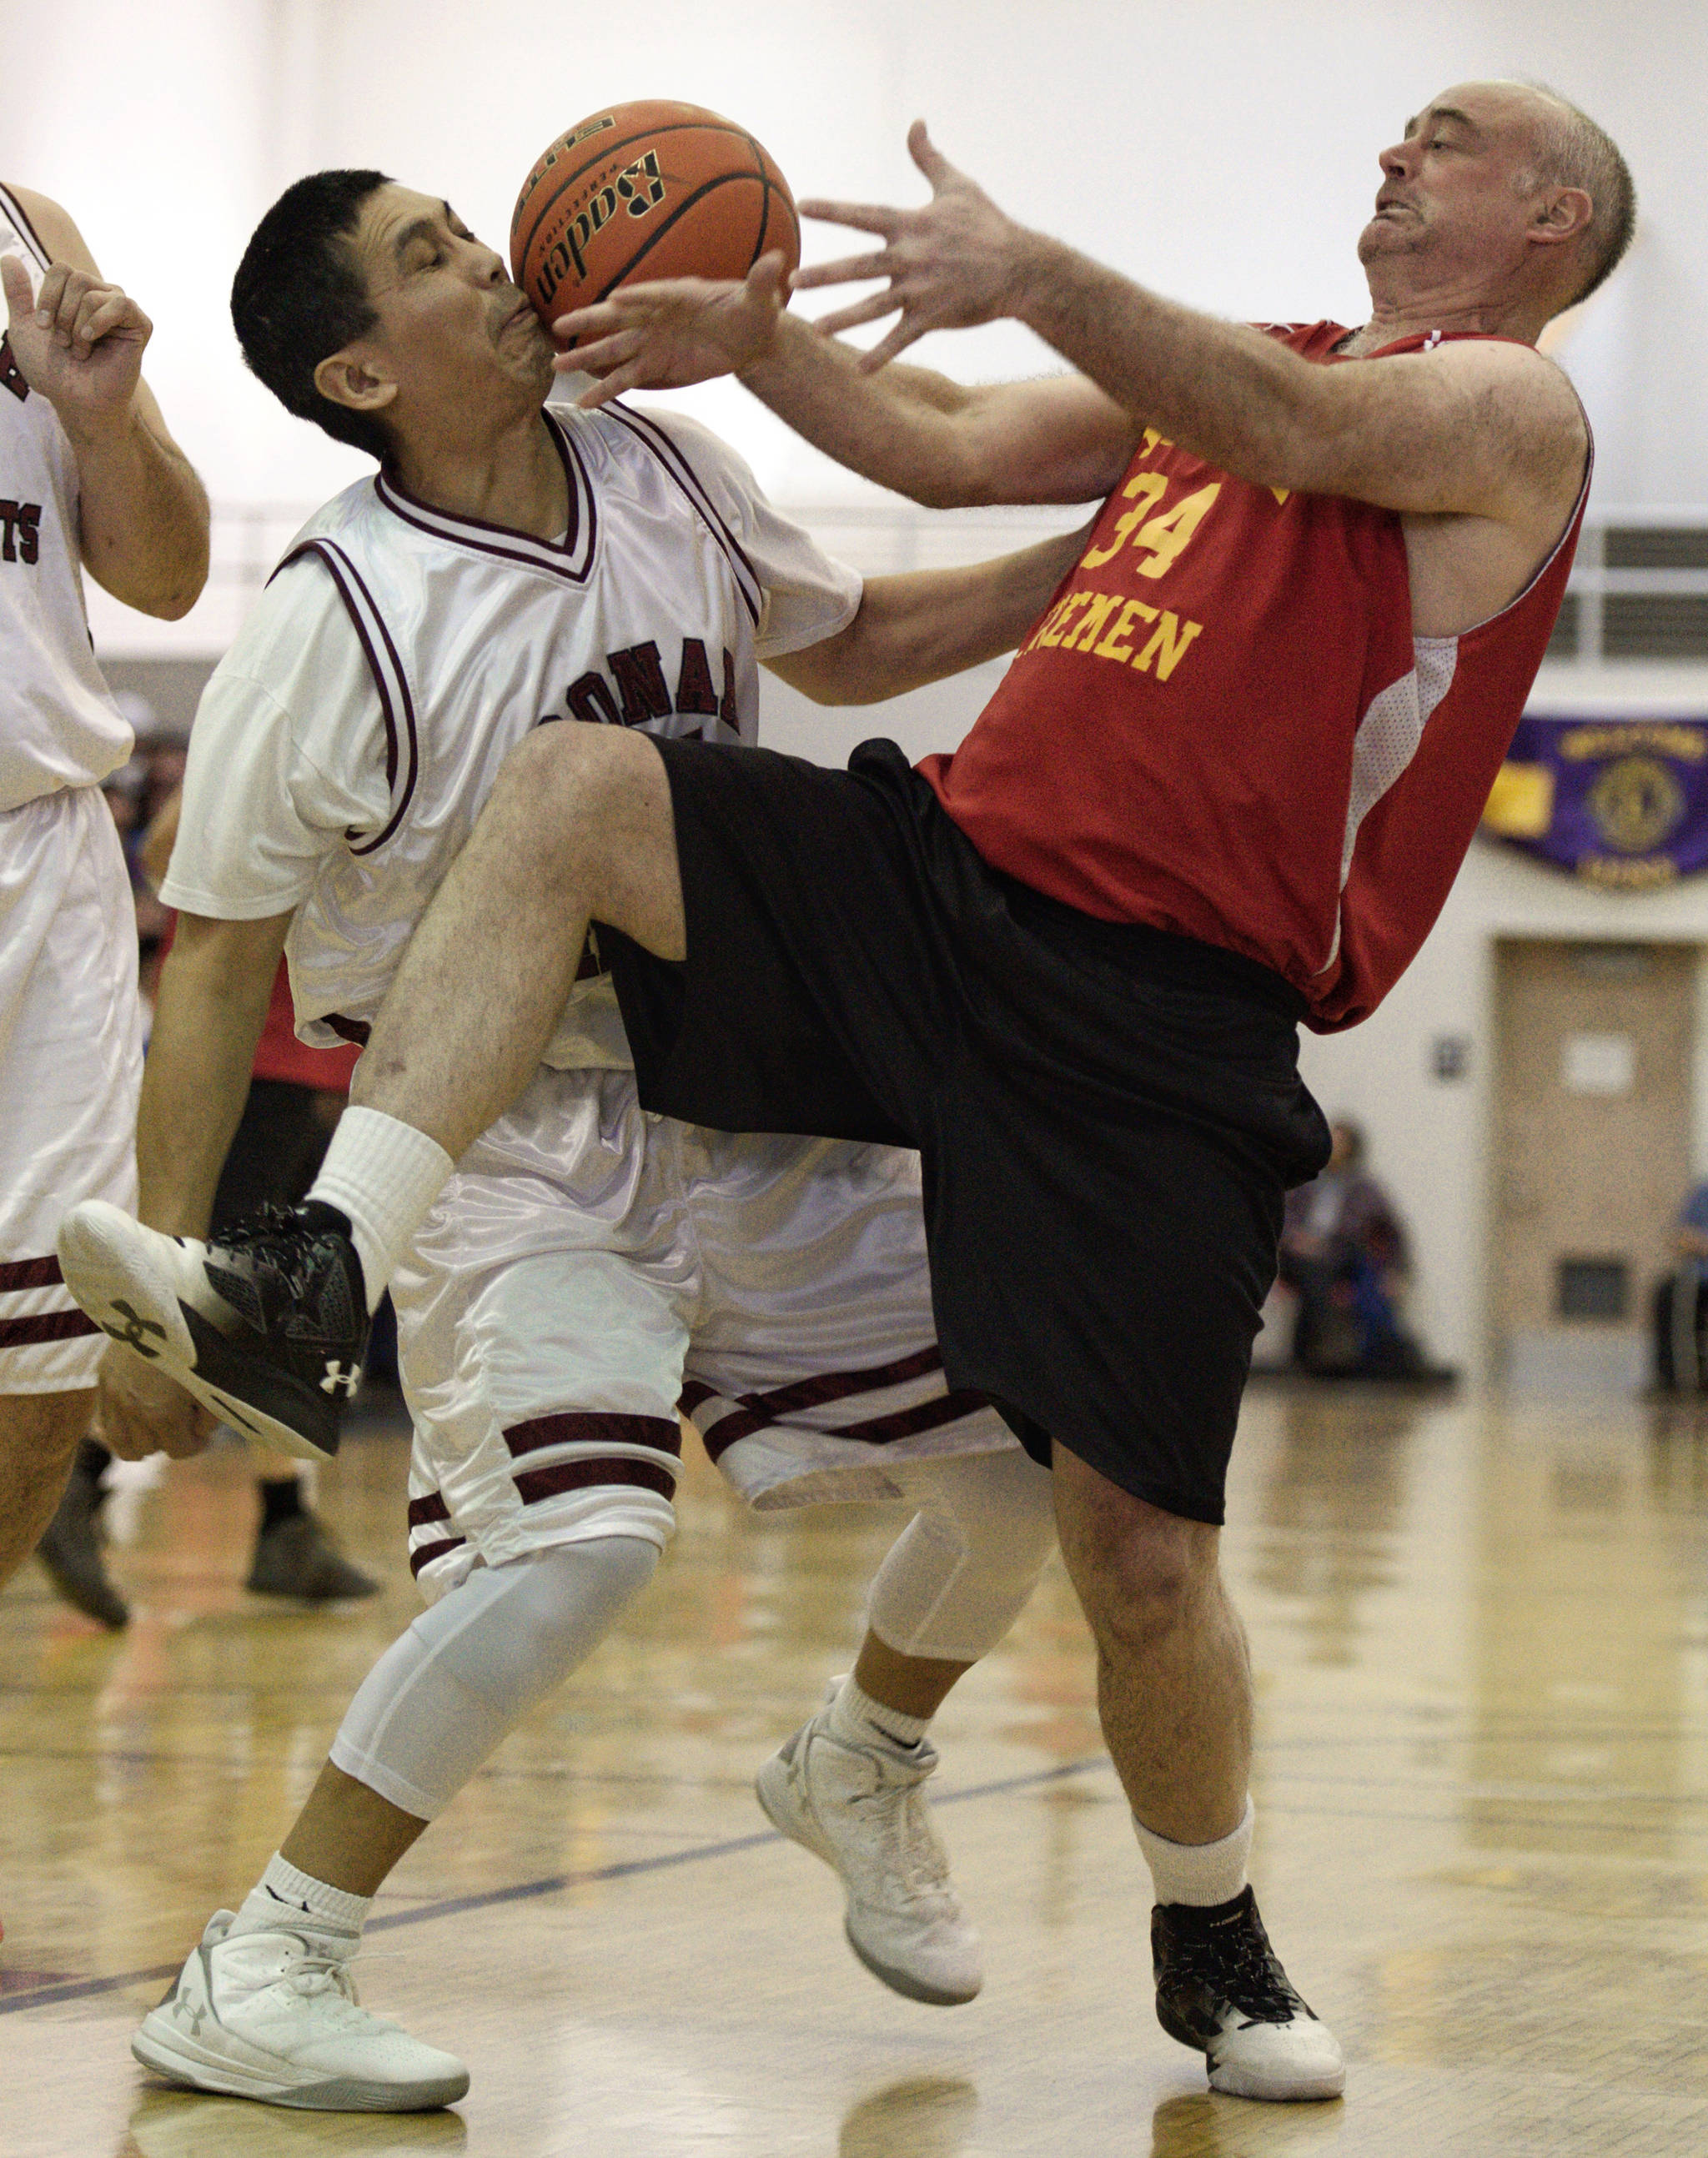 Hoonah’s Kin Willard Jr., left, and Kake’s Jeff Dean fight for a rebound in the Master’s bracket final at the Juneau Lion’s Gold Medal Basketball Tournament at Juneau-Douglas High School on Saturday, March 24, 2018. (Michael Penn | Juneau Empire)